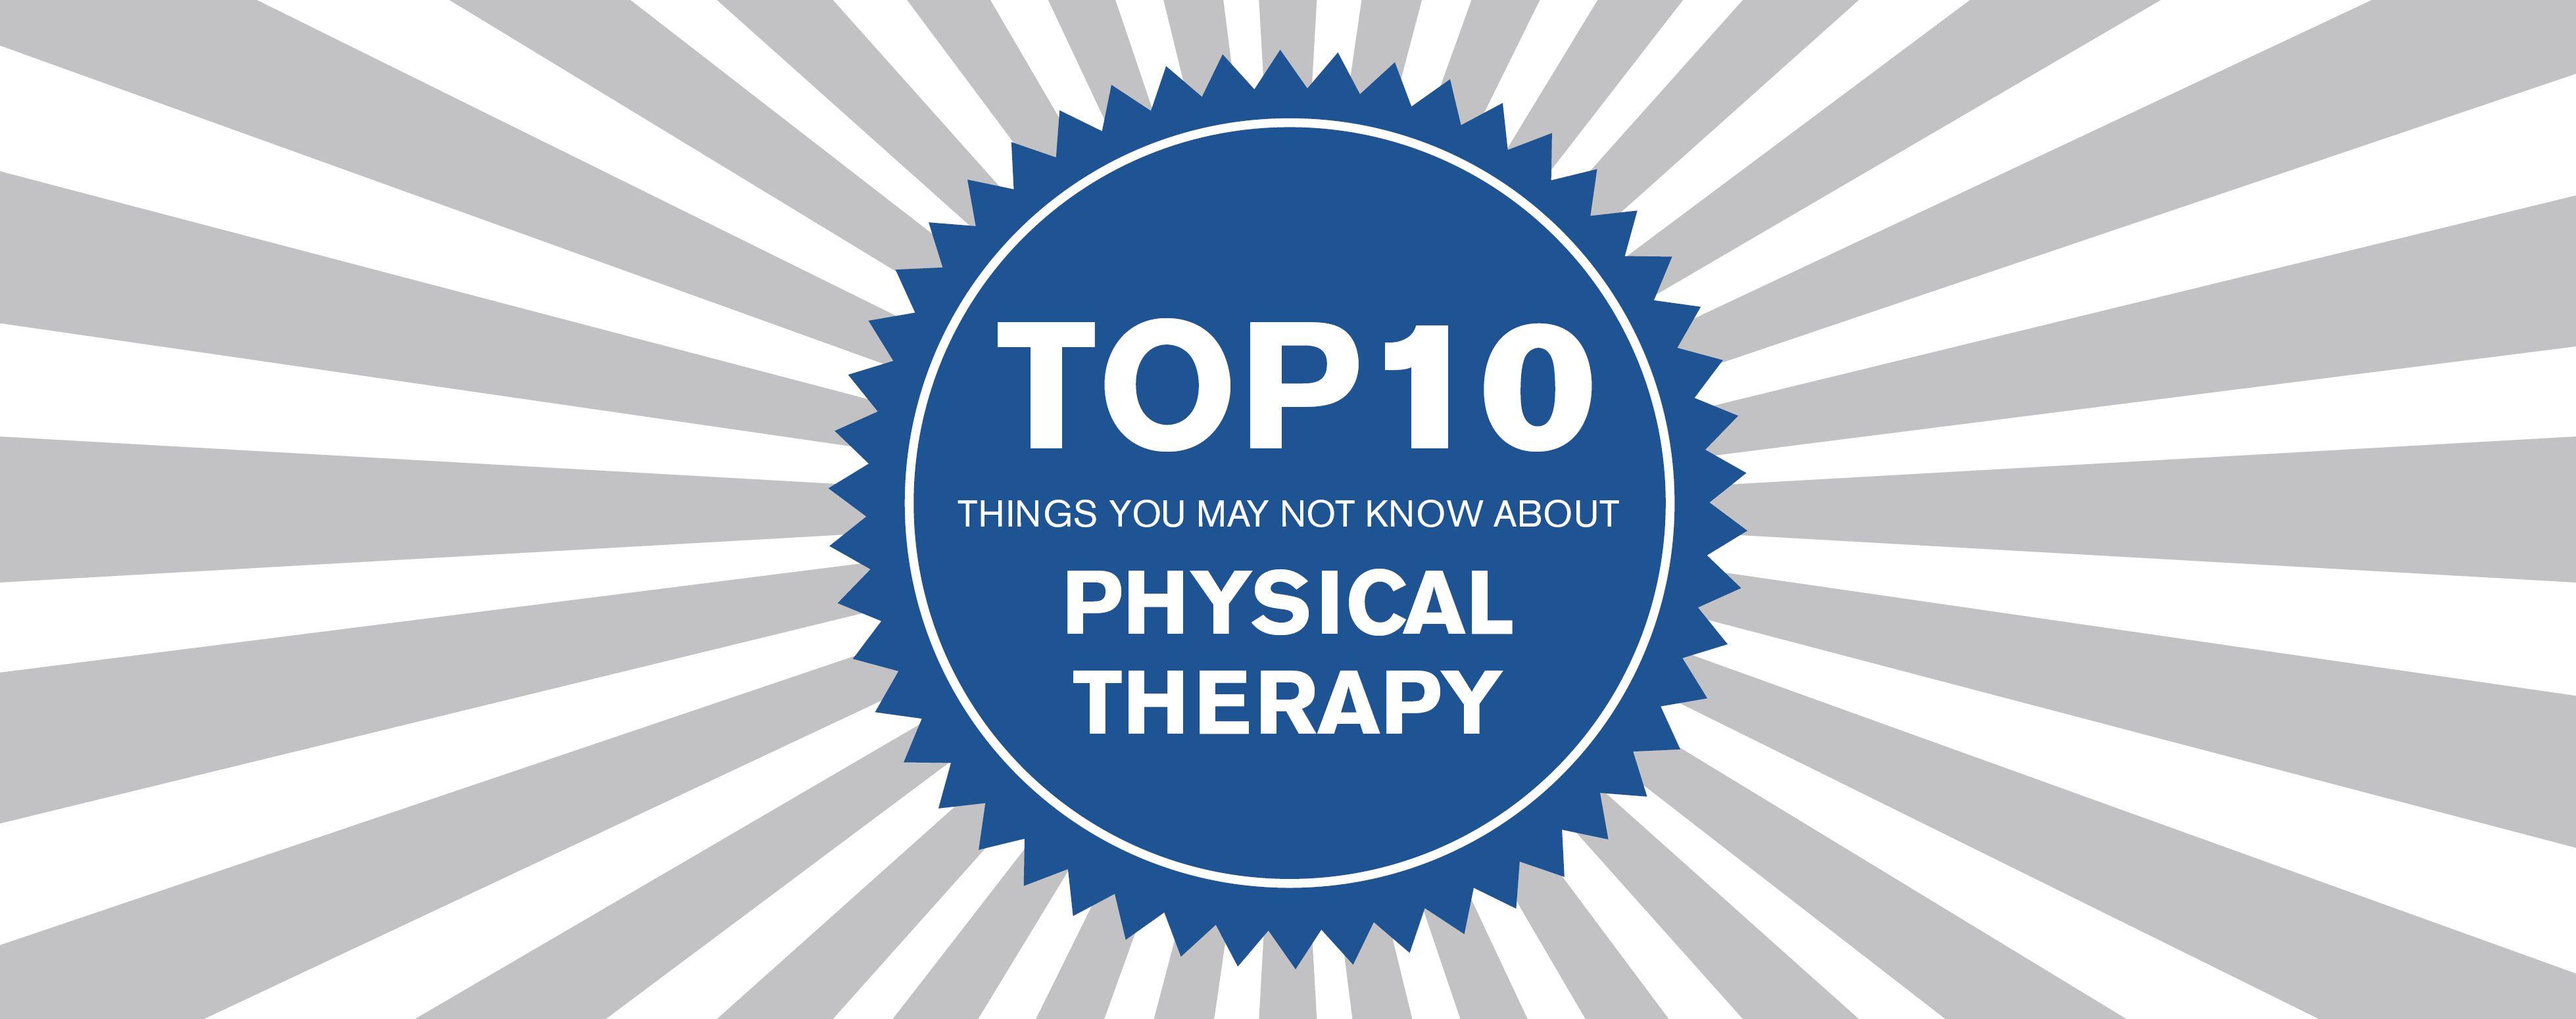 P. Physical Therapy Month Logo - The Top 10 Things You Did Not Know About Physical Therapy - Athletico